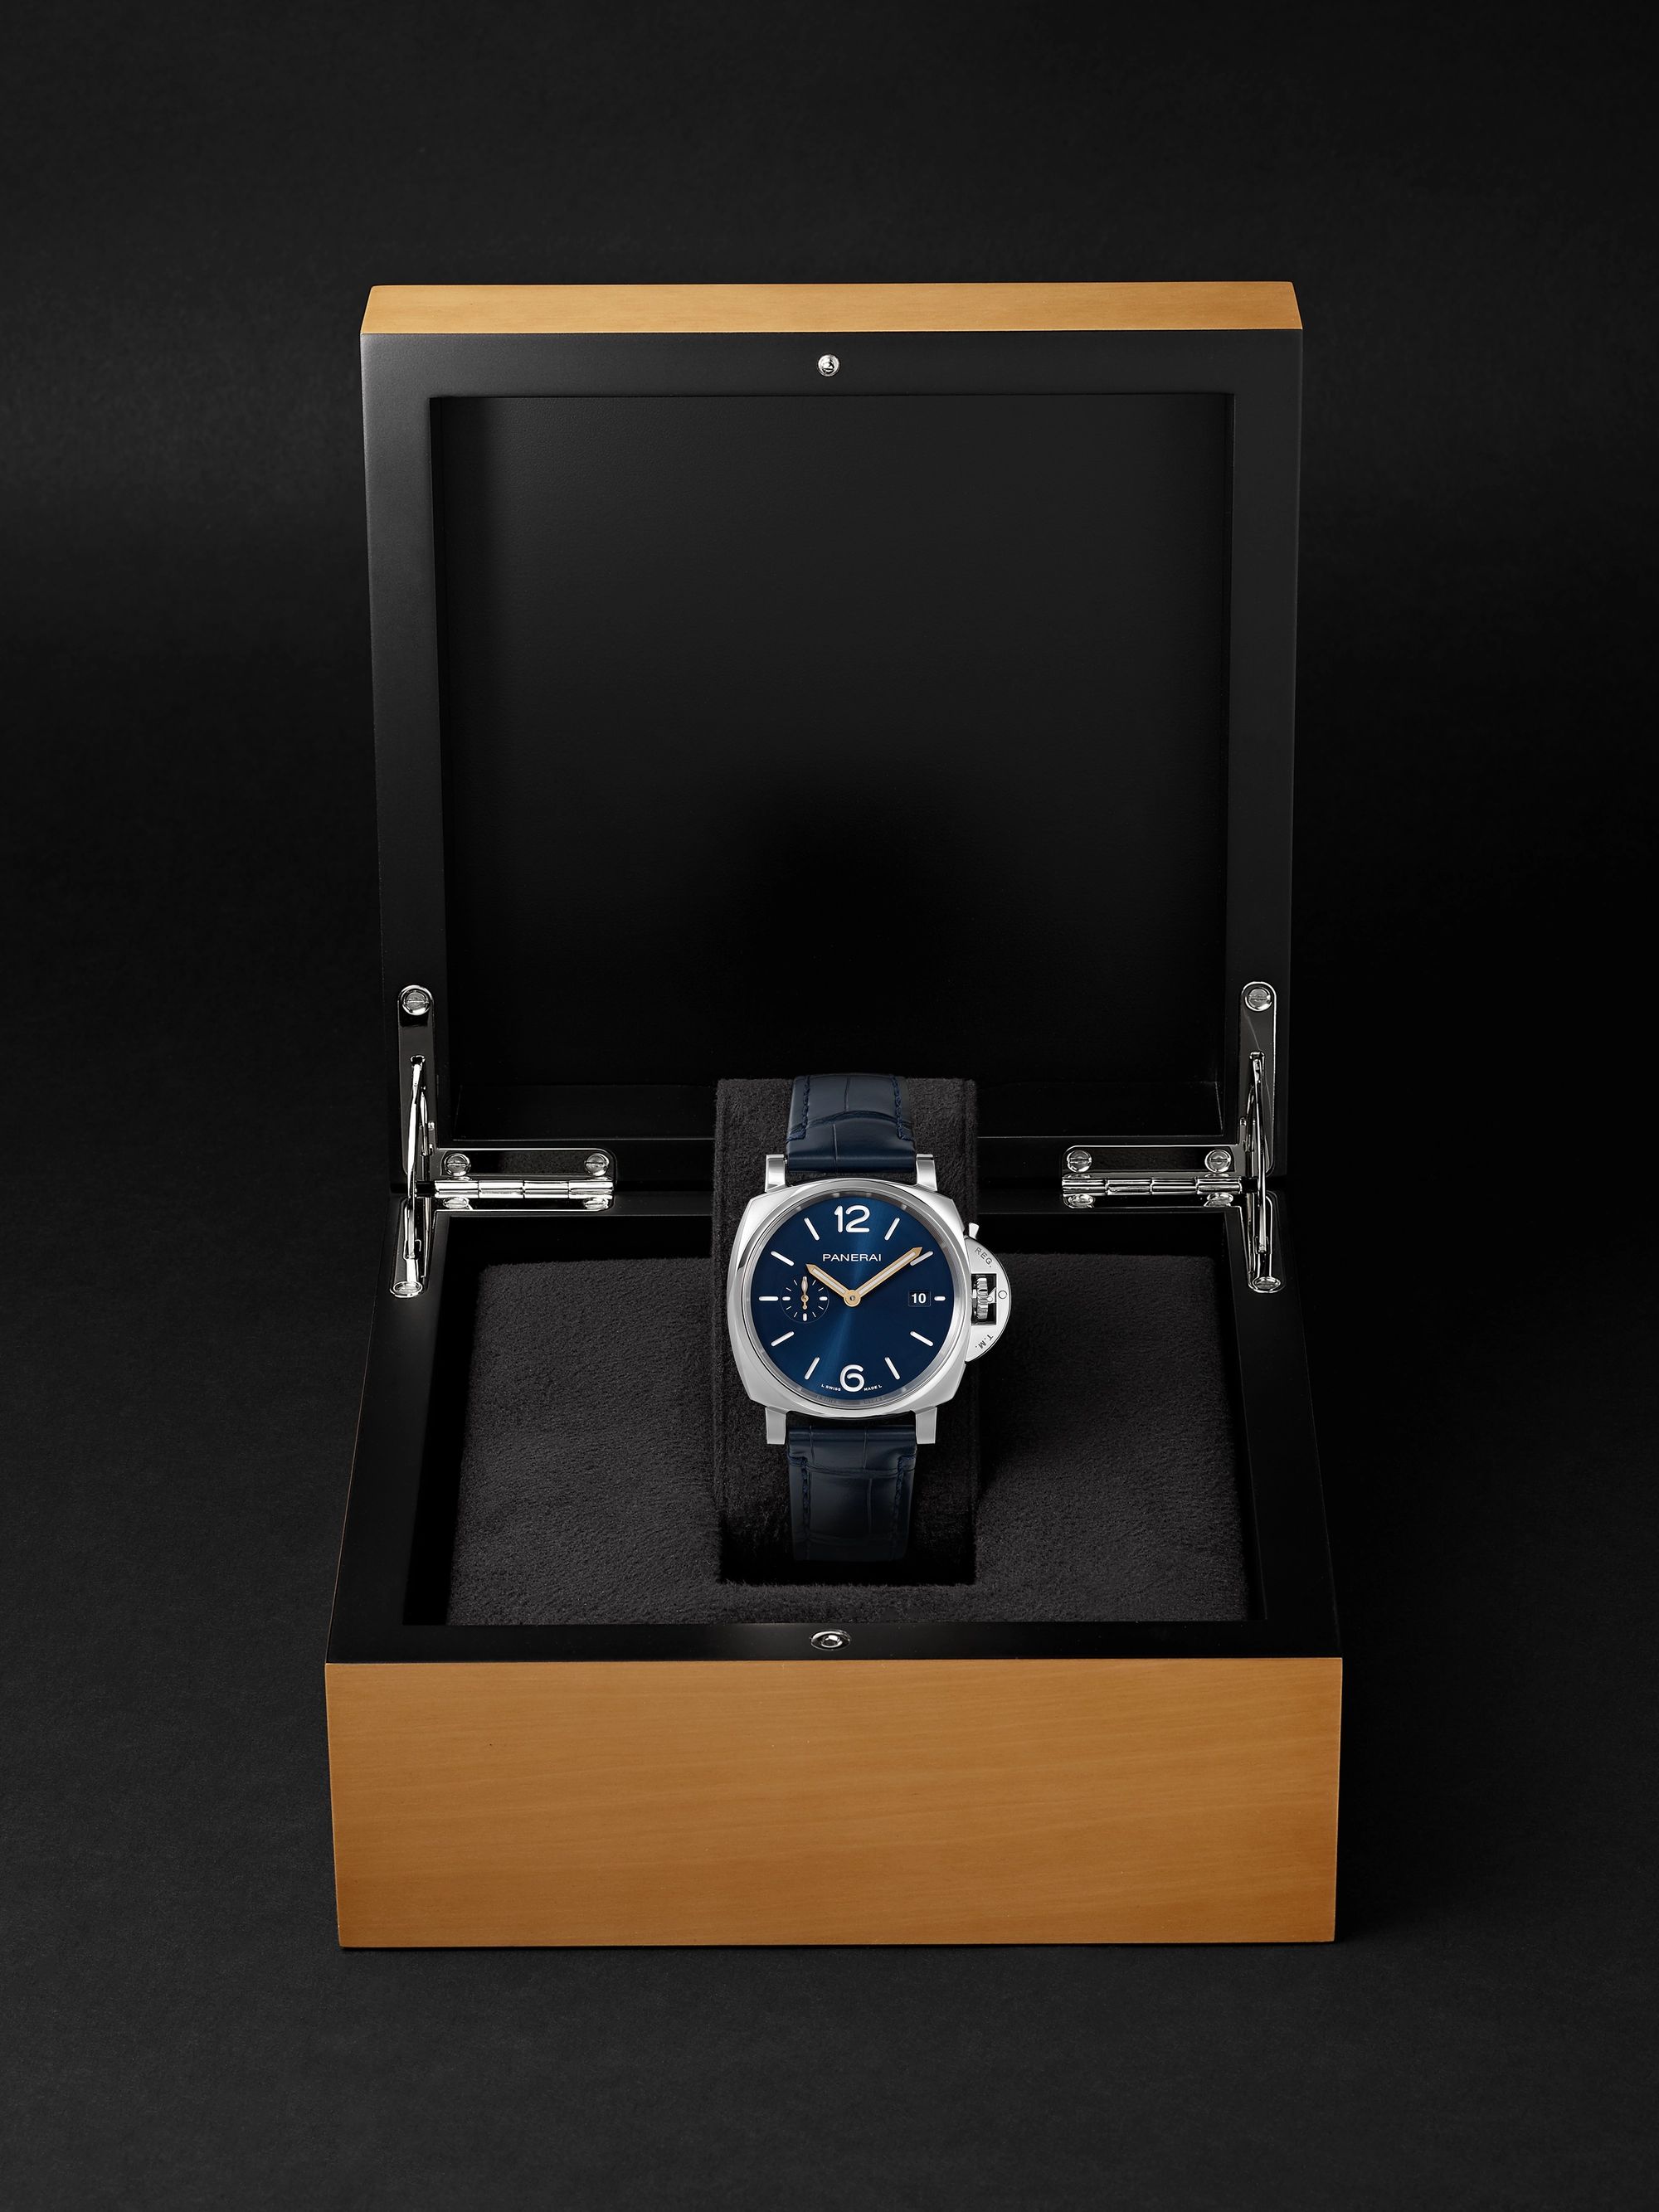 PANERAI Luminor Due Automatic 42mm Stainless Steel and Alligator Watch, Ref. No. PAM01274